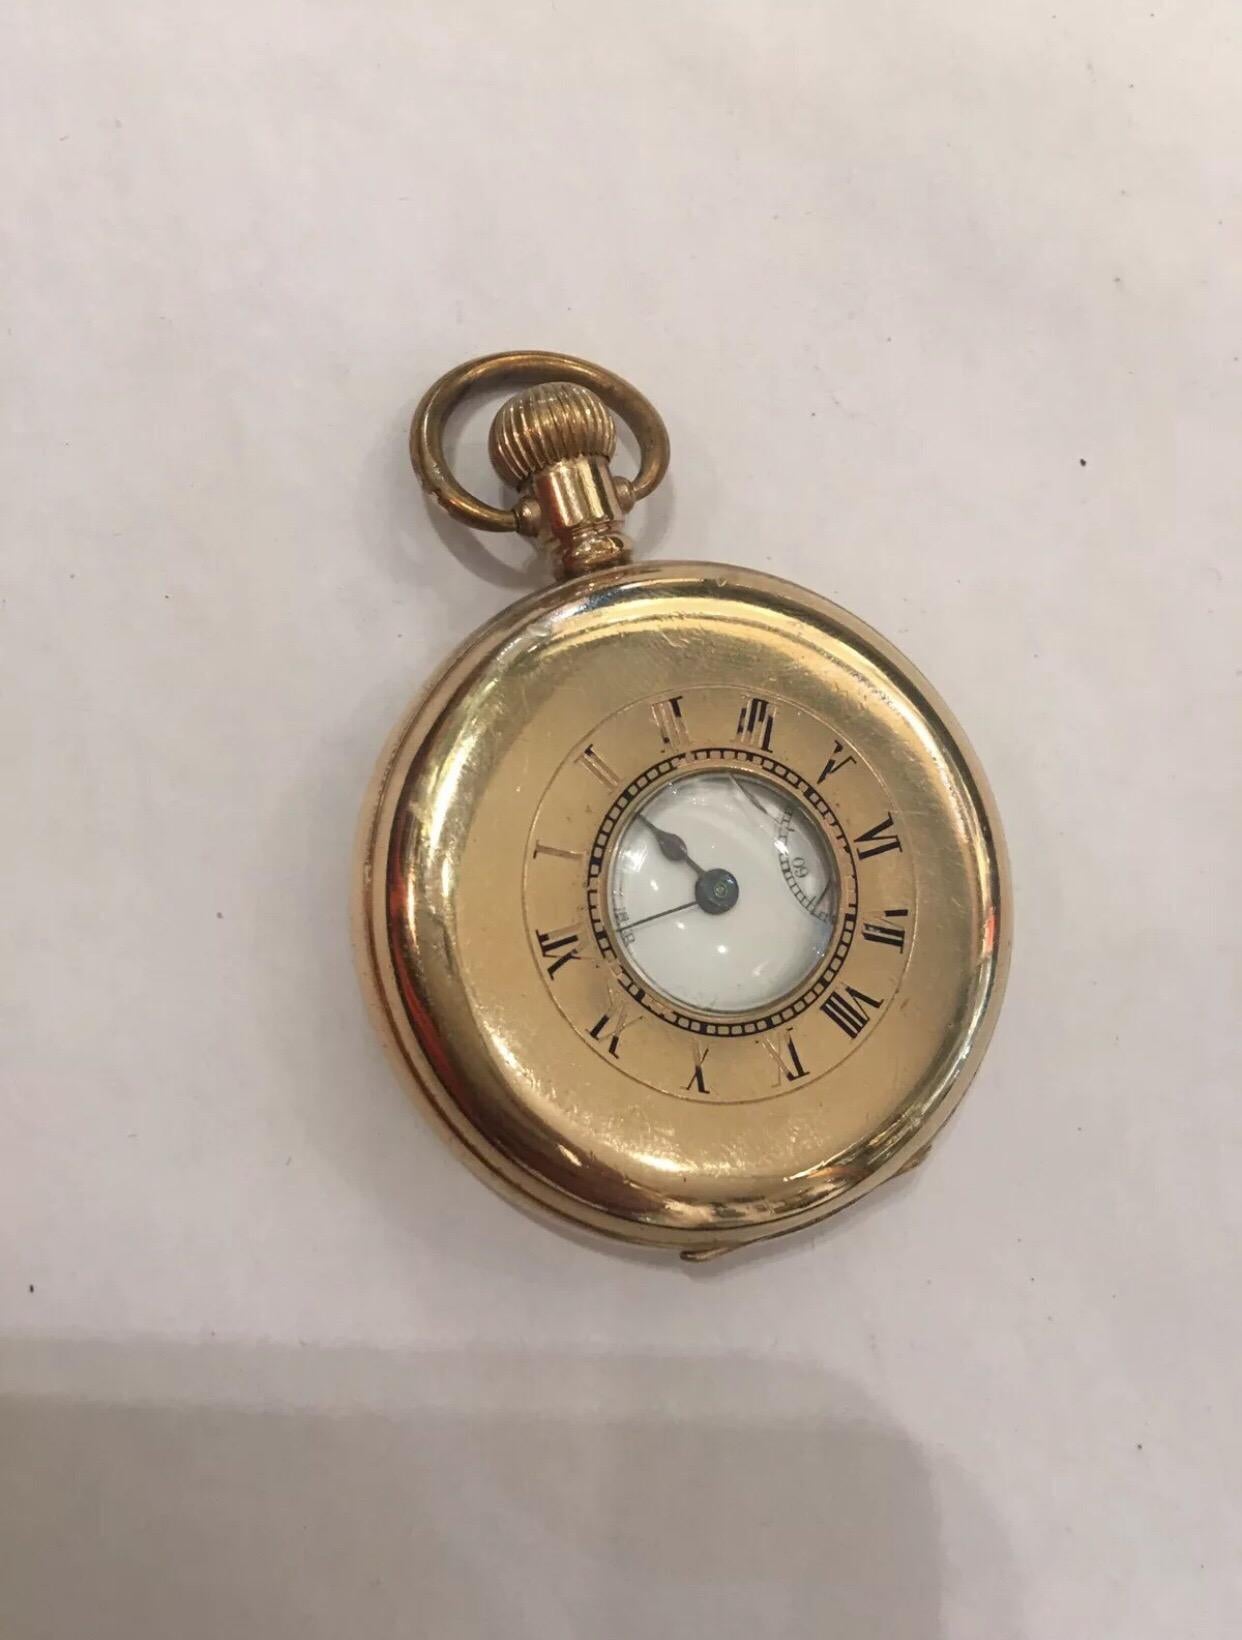 This beautiful 51mm diameter half hunter gold plated hand winding pocket  watch is in good working condition and it is ticking well. Visible signs of ageing and wear with light surface marks on the case as shown. There is a visible crack on the top